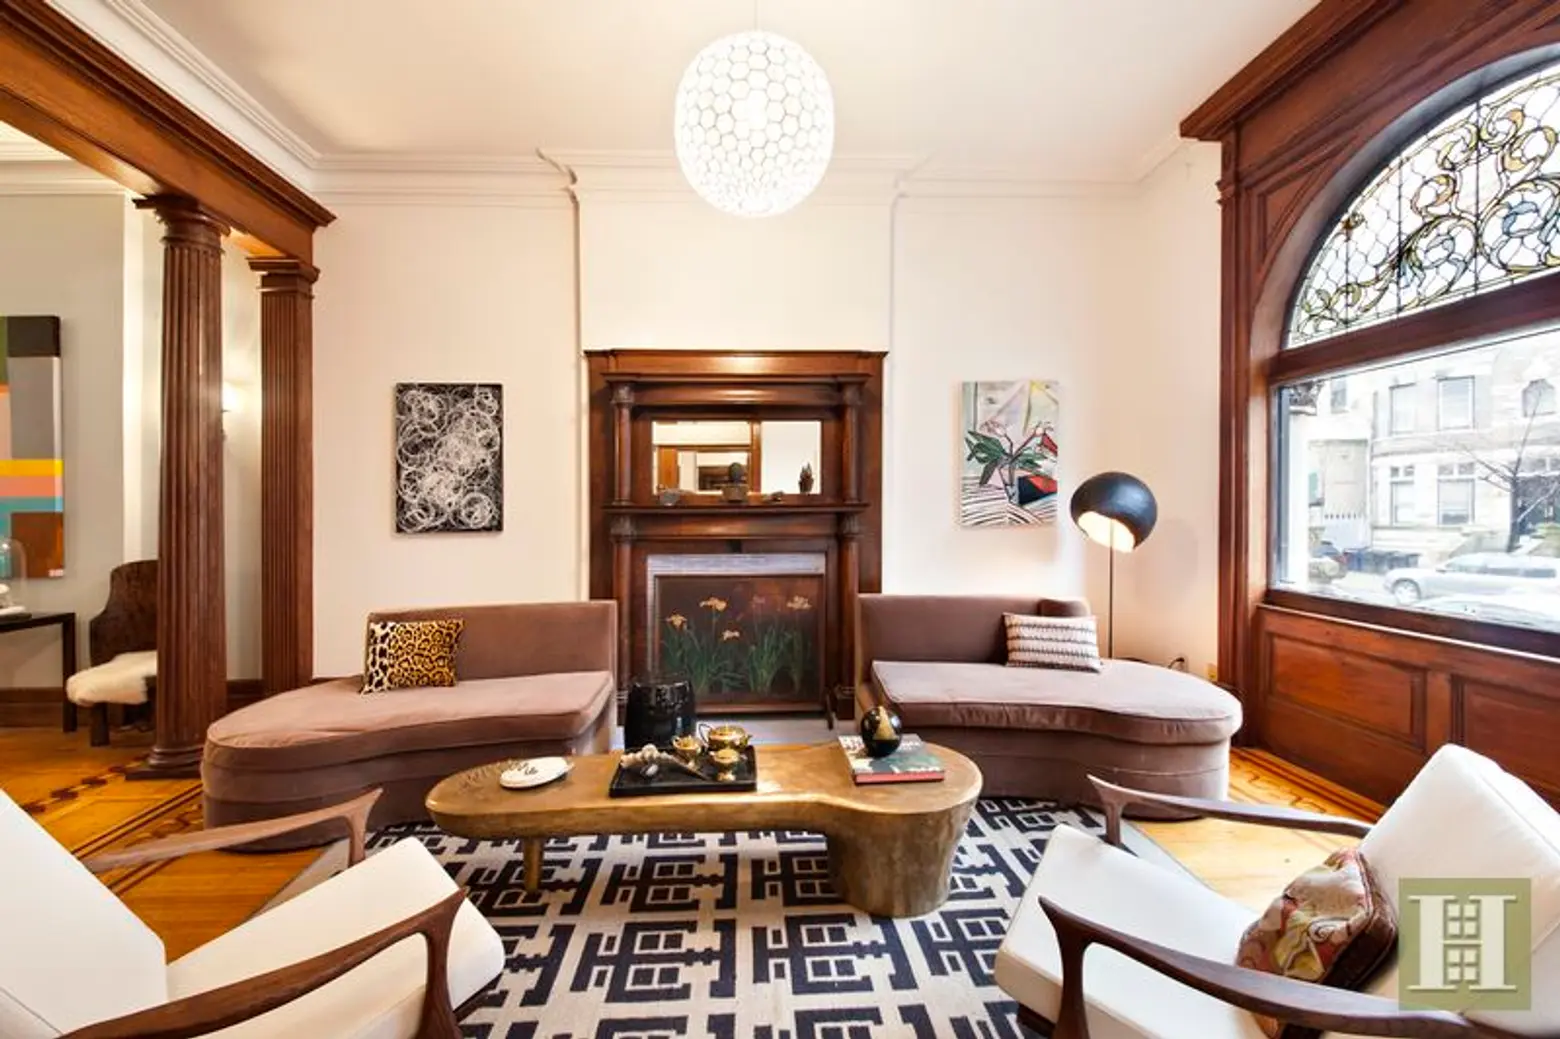 Developer Matthew Blesso Looks for a Profit on This Gorgeous Park Slope Townhouse